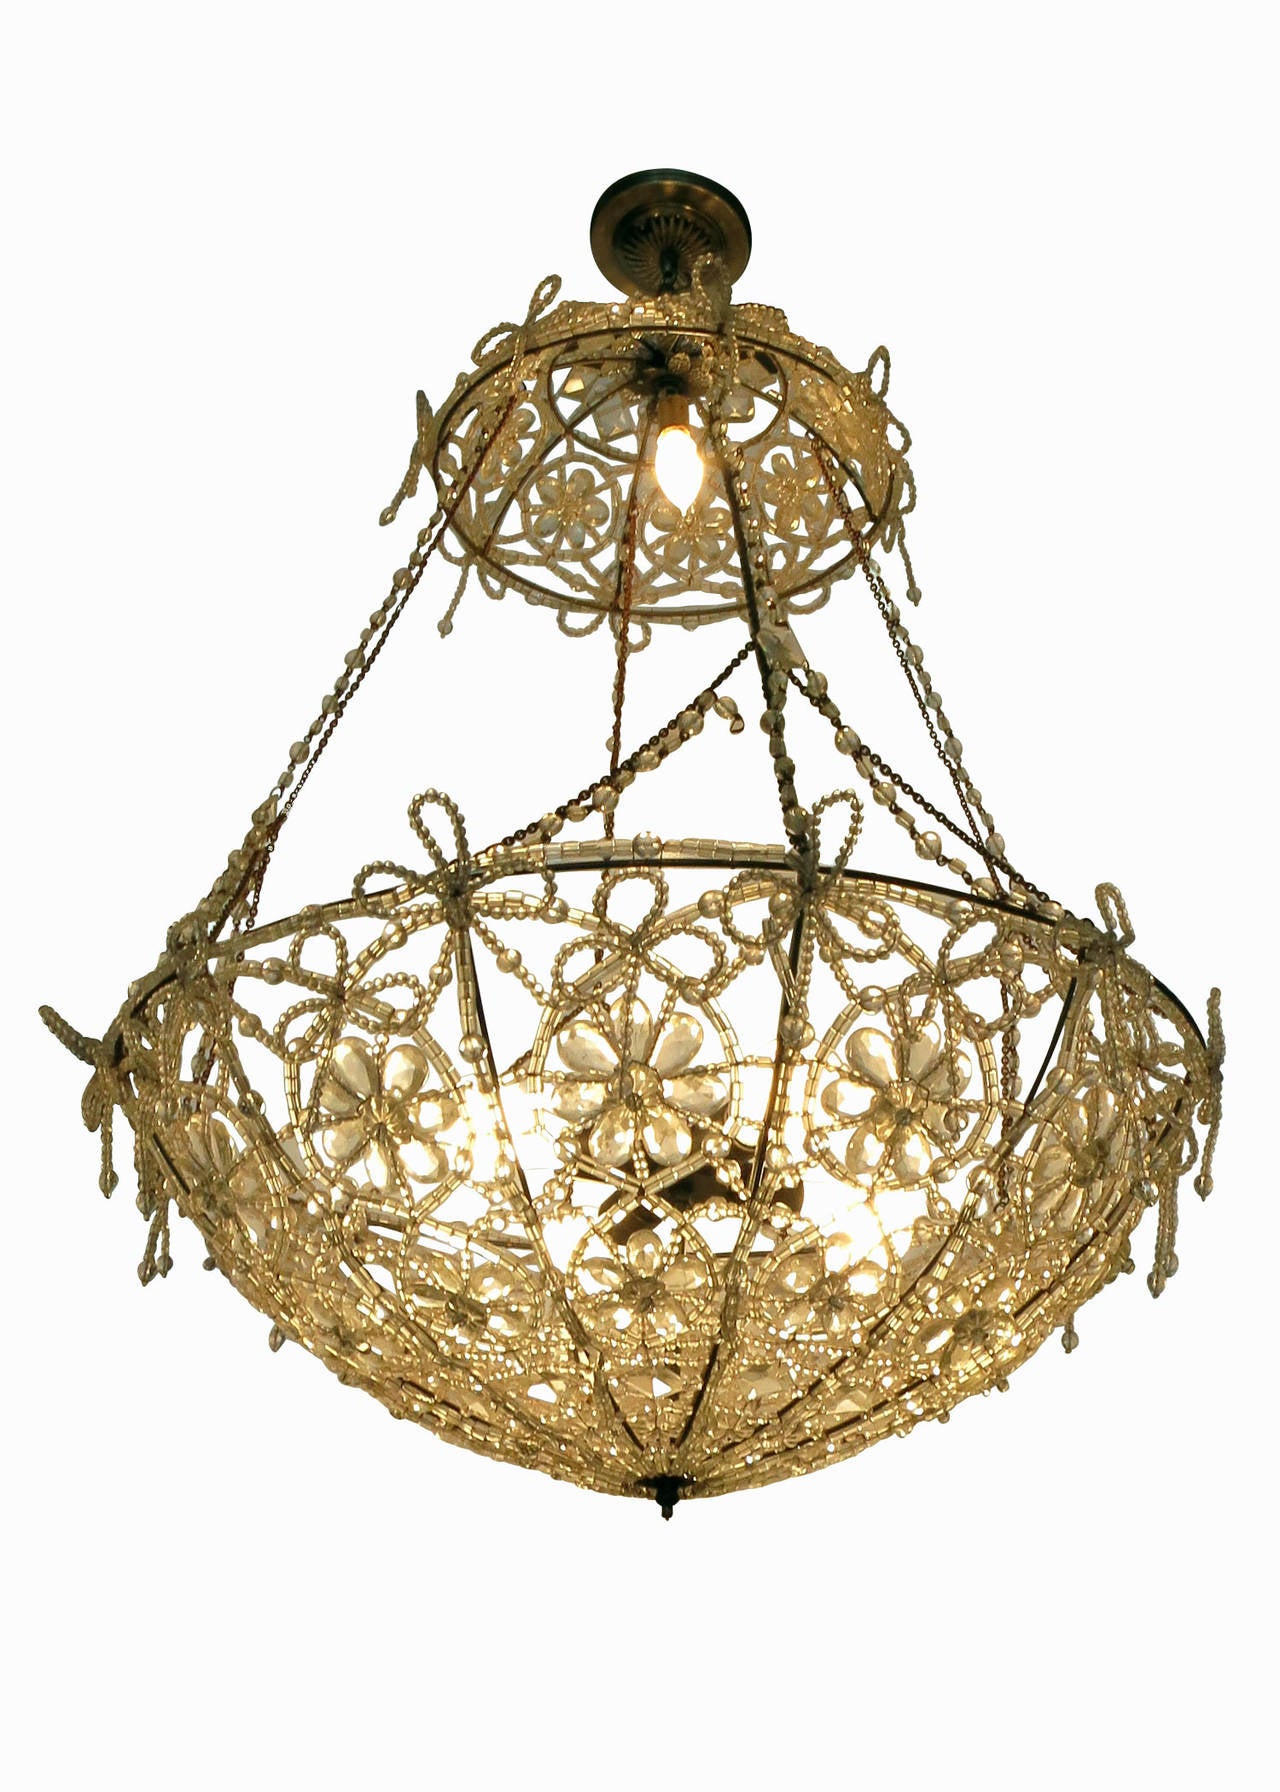 This piece is a Hollywood Regency style large beaded basket chandelier with beaded chain supports. The chandelier features a unique floral pattern made with hundreds of hand beaded wire threads. A beaded leaf clover with a drop of graduated beads